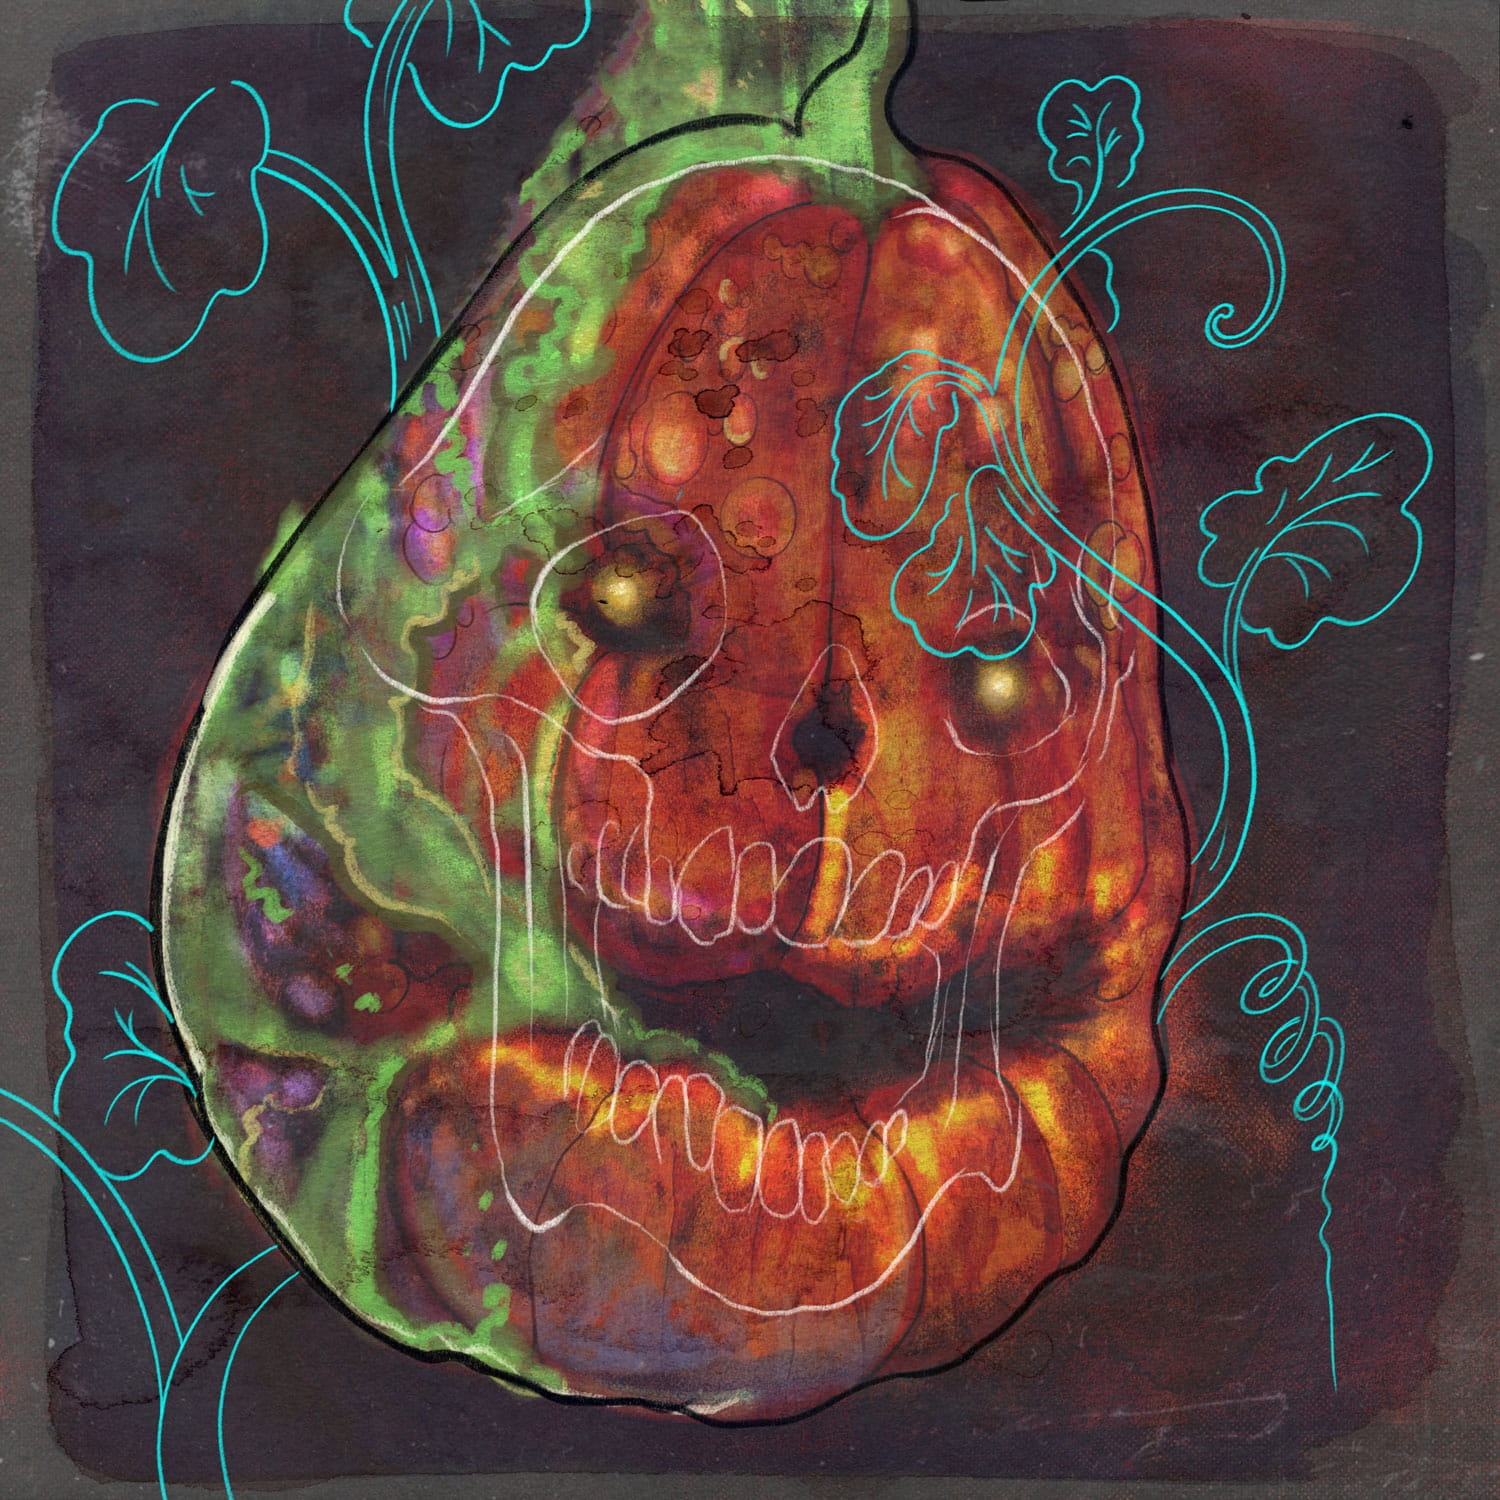 A hazy, green and purple, rotting and moldy pumpkin with a sharp, line-art skull and frontlike plants superimposed.